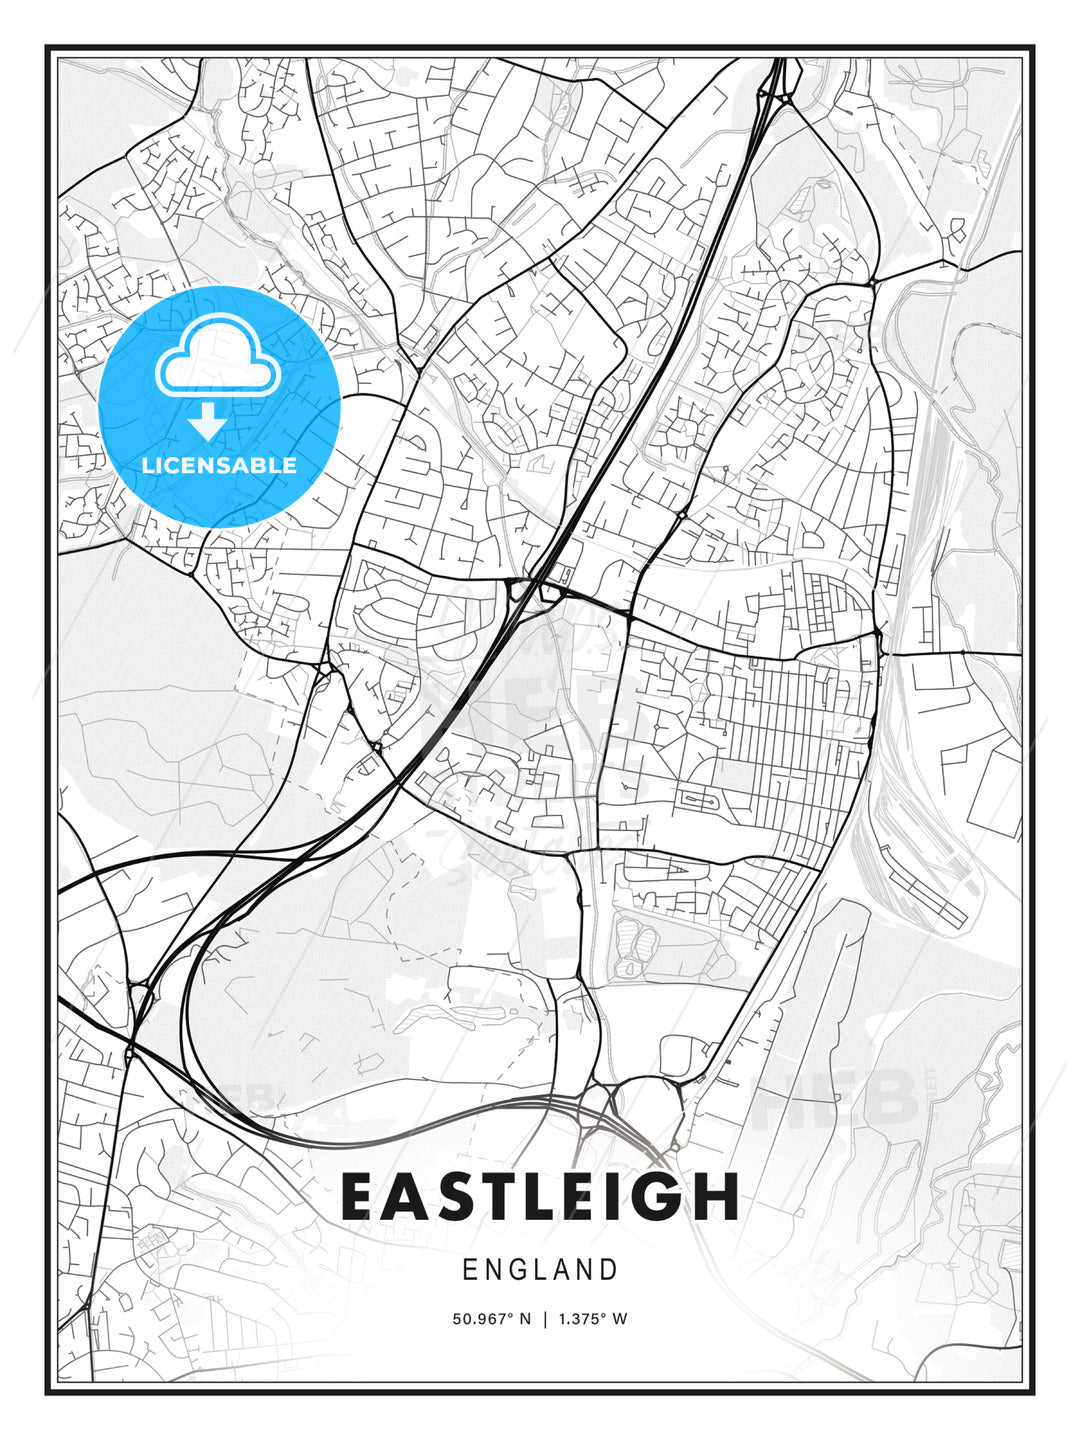 Eastleigh, England, Modern Print Template in Various Formats - HEBSTREITS Sketches